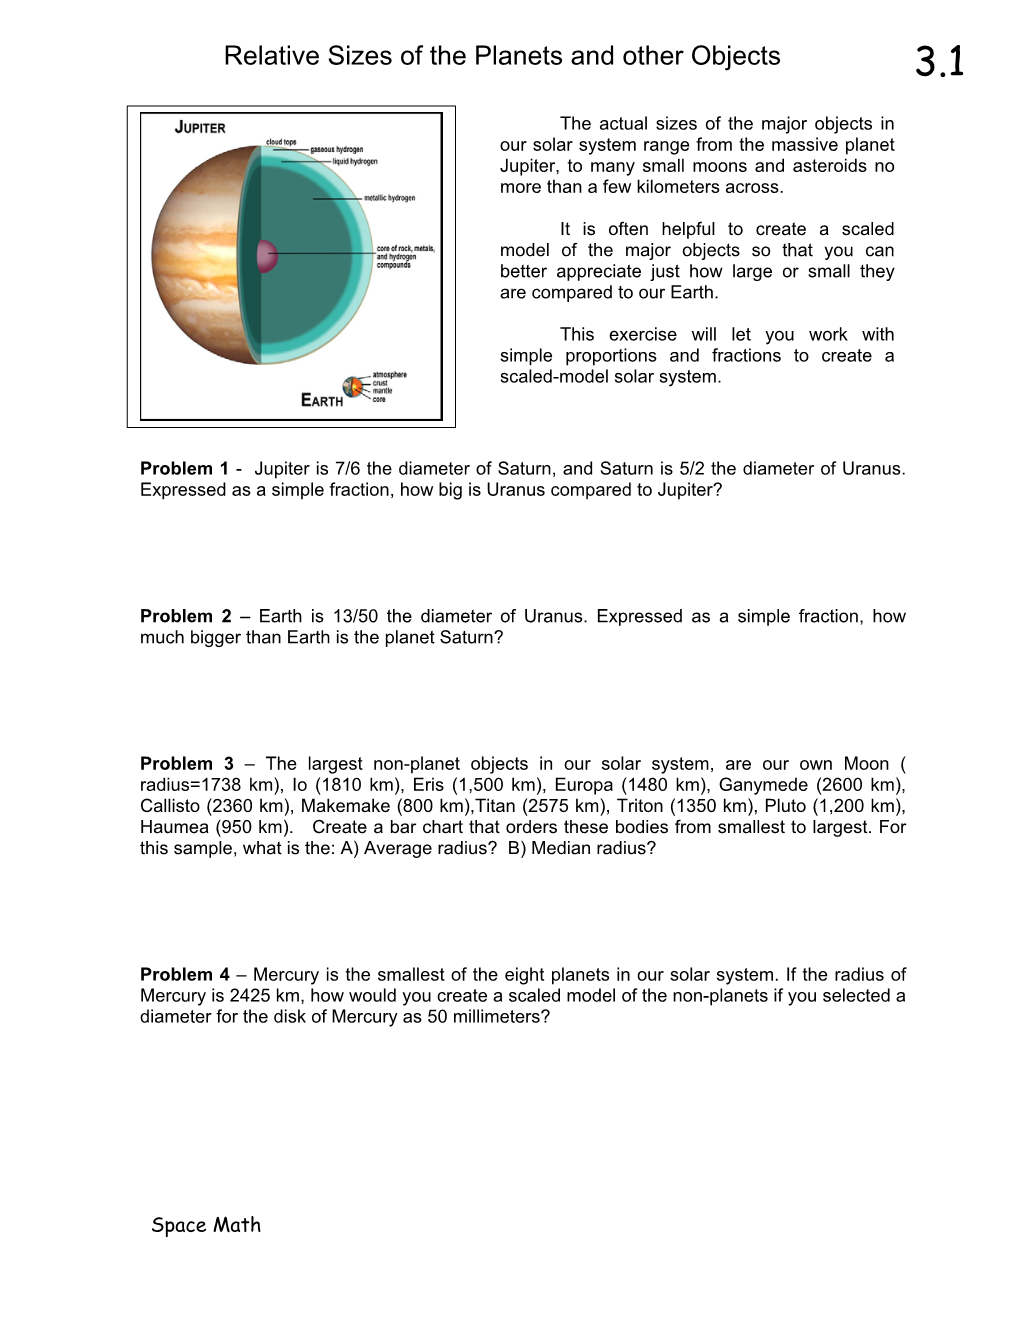 The Planets -- Investigating Our Planetary Family Tree